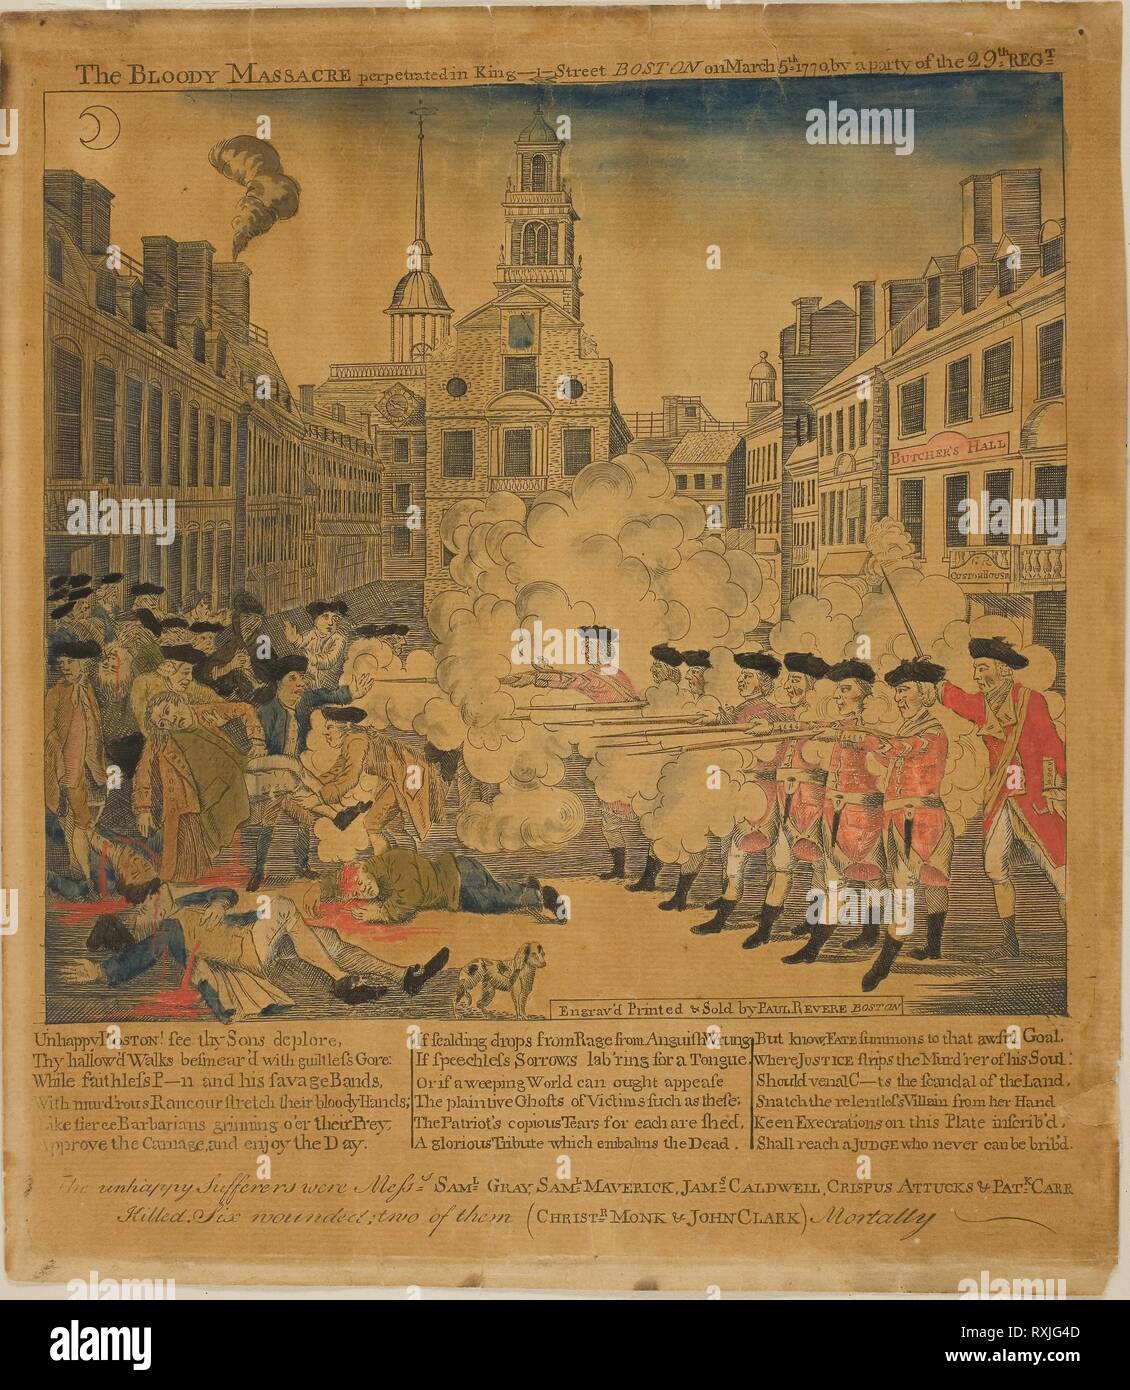 The Boston Massacre. Paul Revere, II; American, 1735-1818. Date: 1770. Dimensions: 202 x 219 mm (image); 262 x 230 mm (block); 276 x 240 mm (sheet). Wood engraving, with hand coloring, on tan laid paper. Origin: United States. Museum: The Chicago Art Institute. Stock Photo